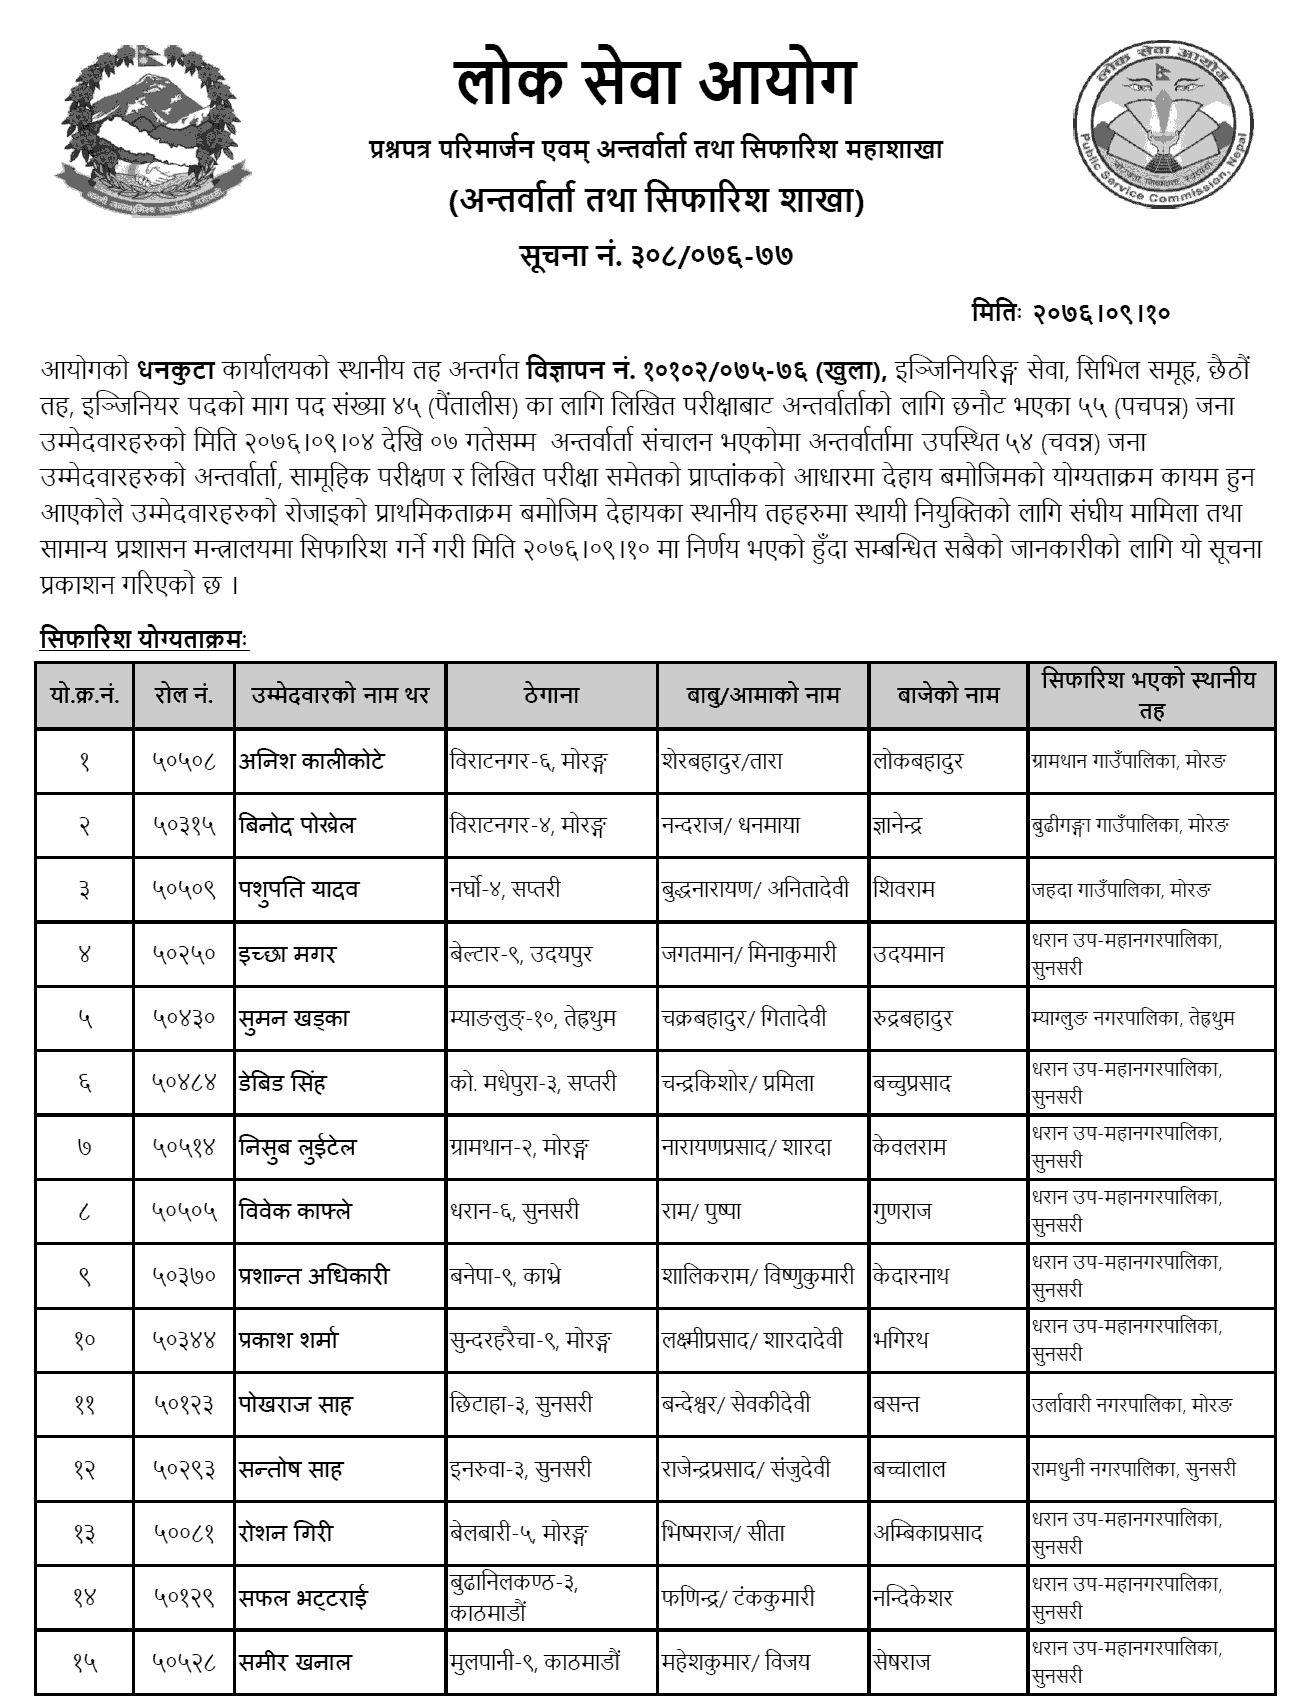 Lok Sewa Aayog Dhankuta Local Level 6th Engineering Final Result and Appointment